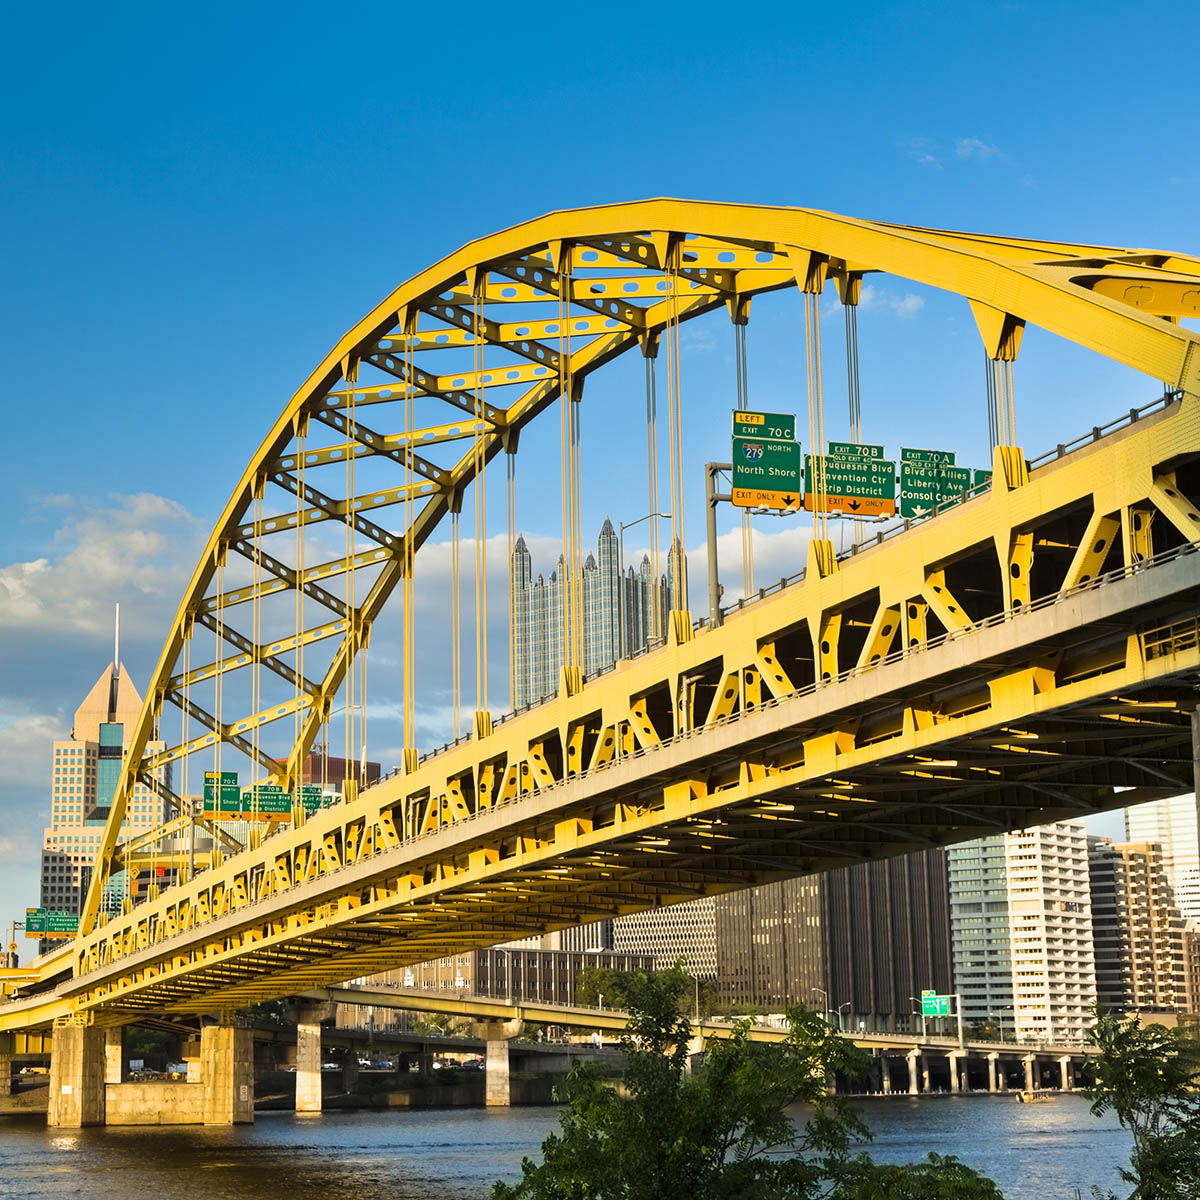 Bright photo of a yellow bridge in Pittsburgh on a sunny day against blue sky